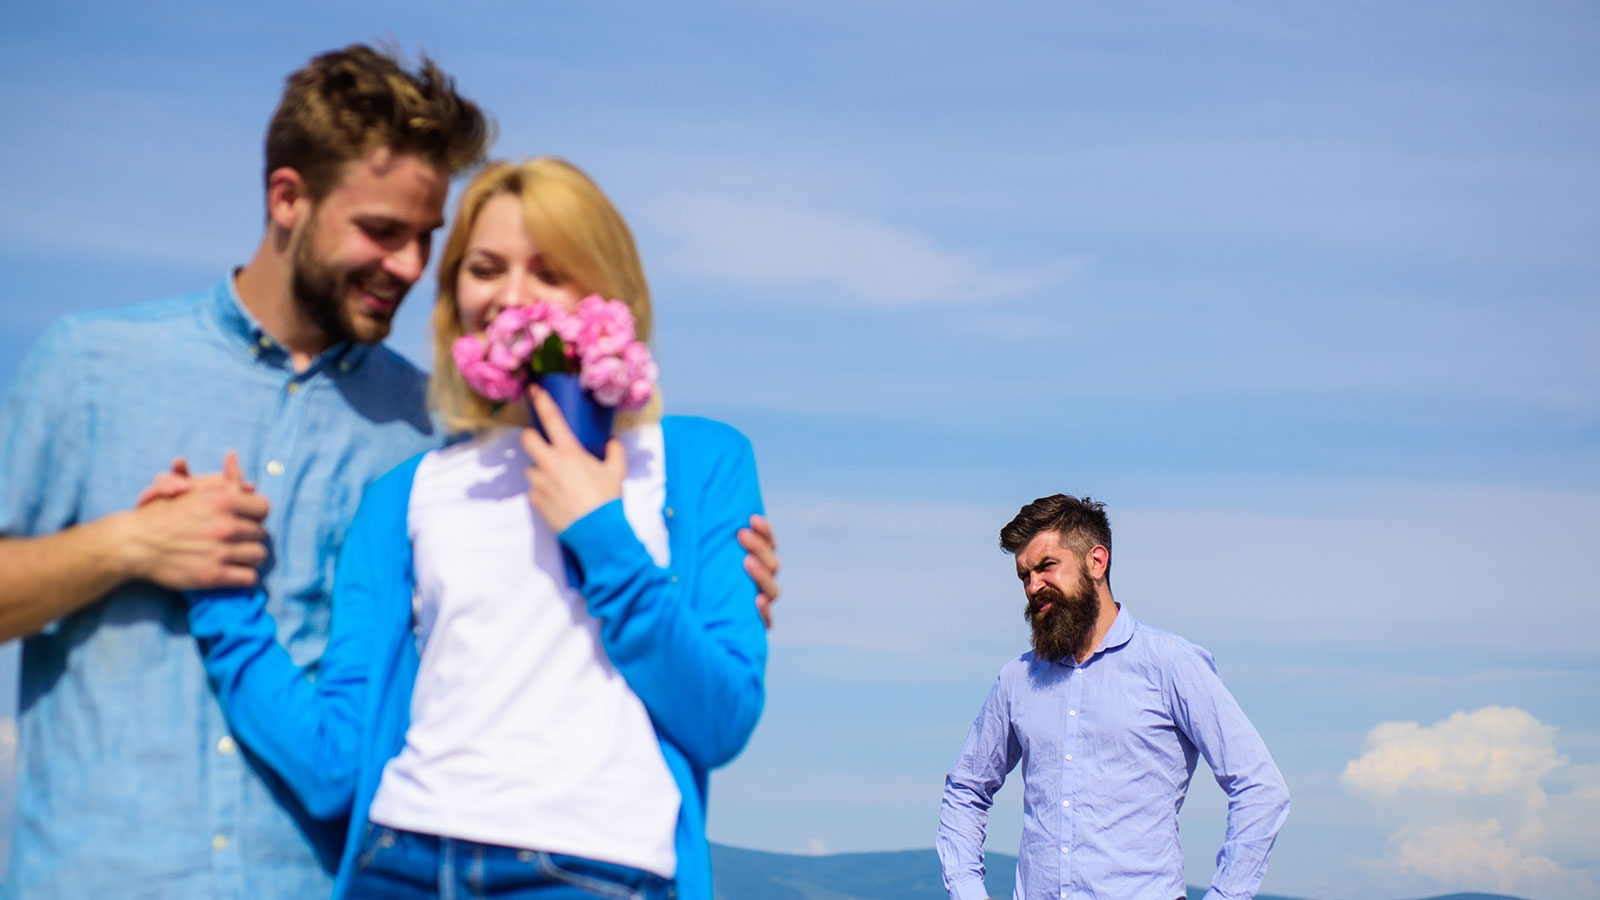 Is It Okay to Pursue a Relationship with a Friends Ex? ⋆ Colorado Marriage Retreats pic